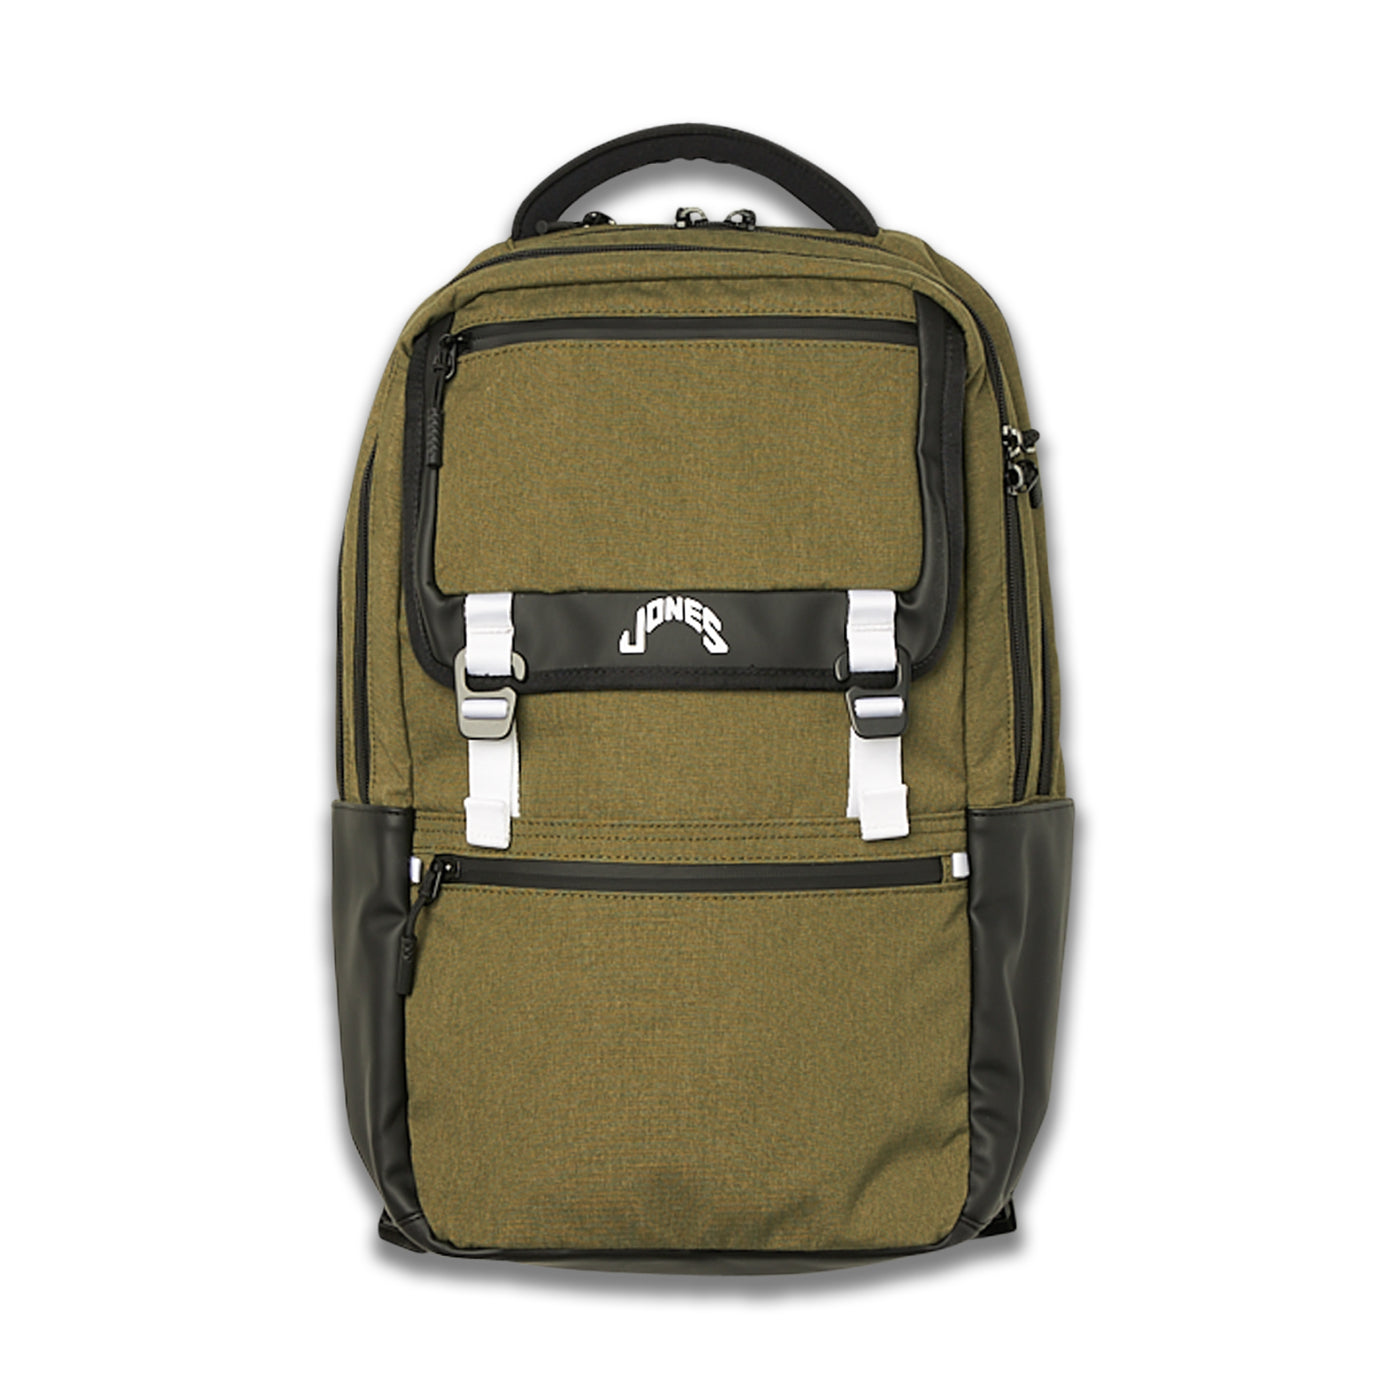 A2 Backpack R - Olive